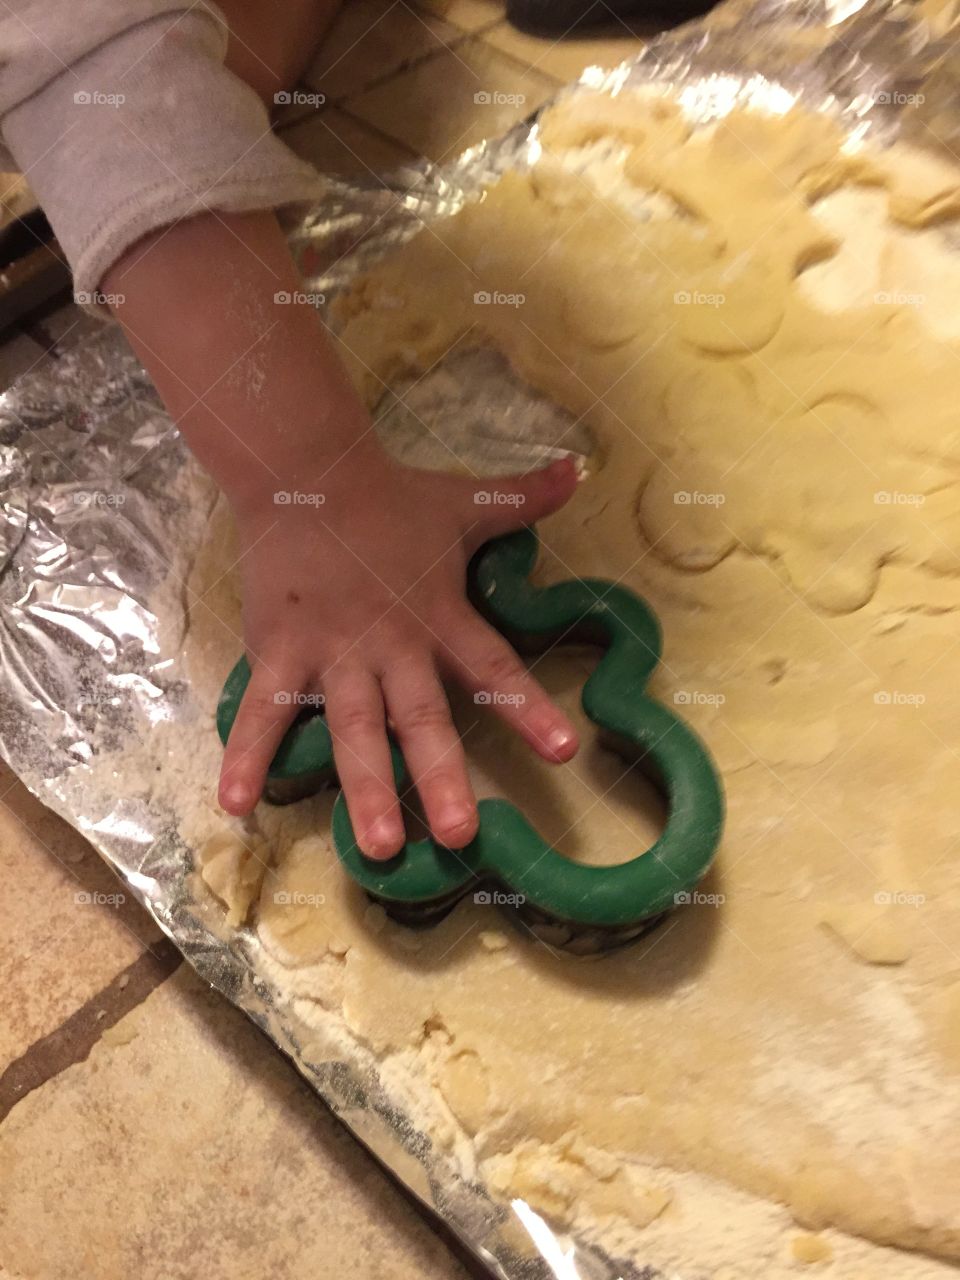 Grandson helping me make sugar cookie with cookie cutter 